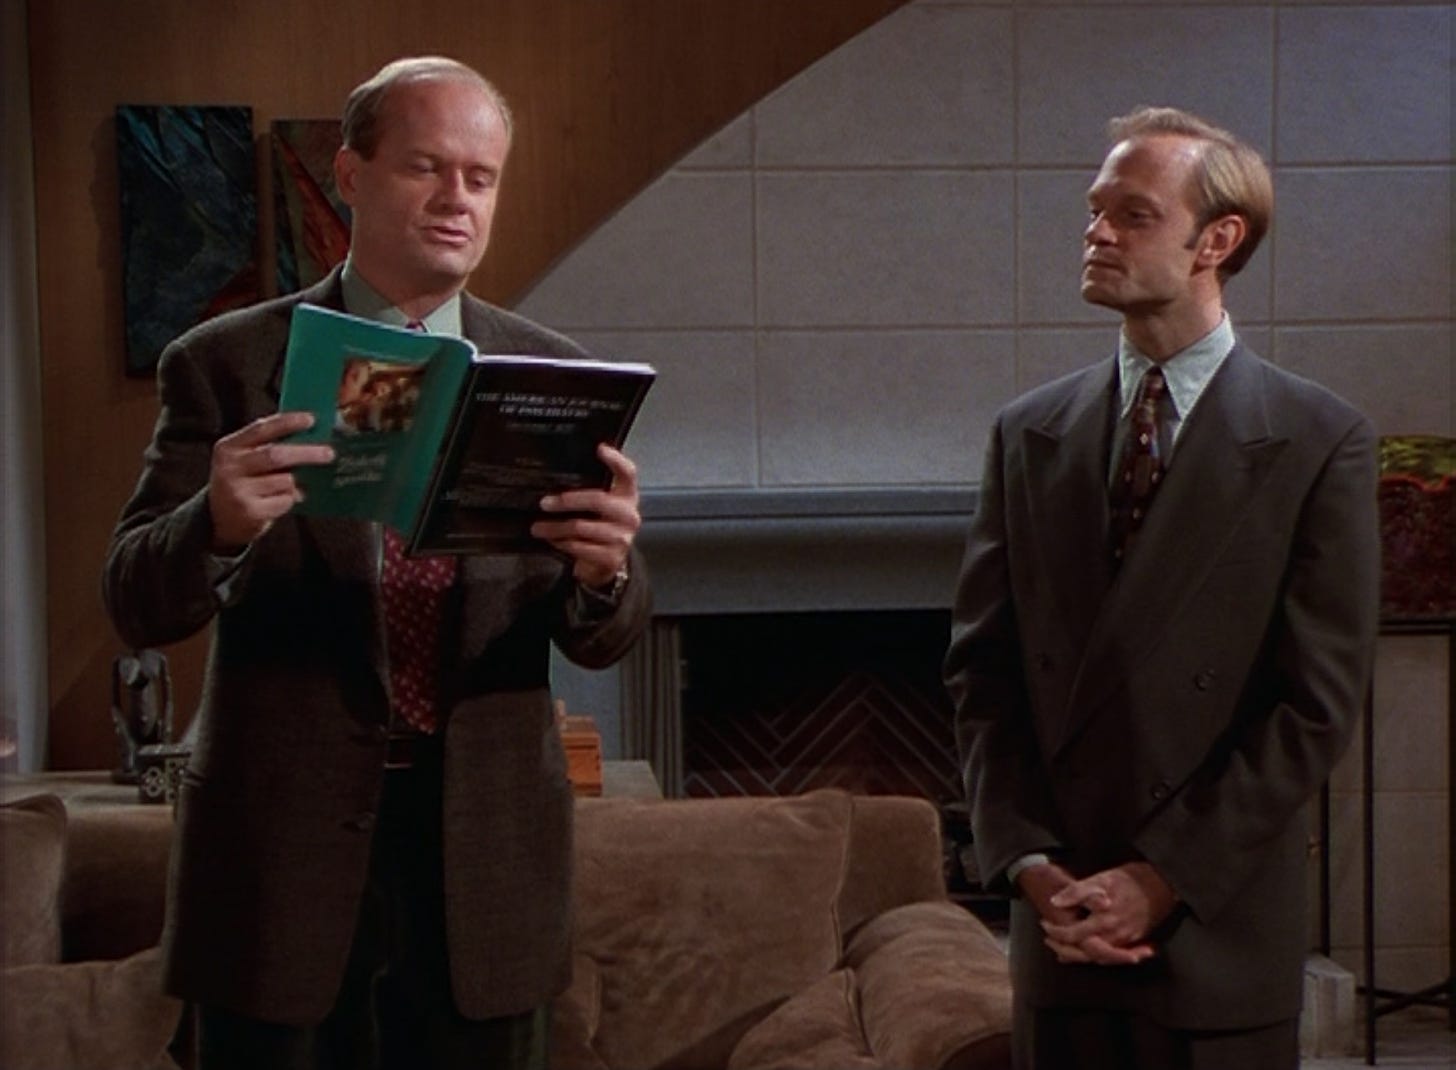 Frasier and Niles Crane reading the American Journal of Psychiatry.